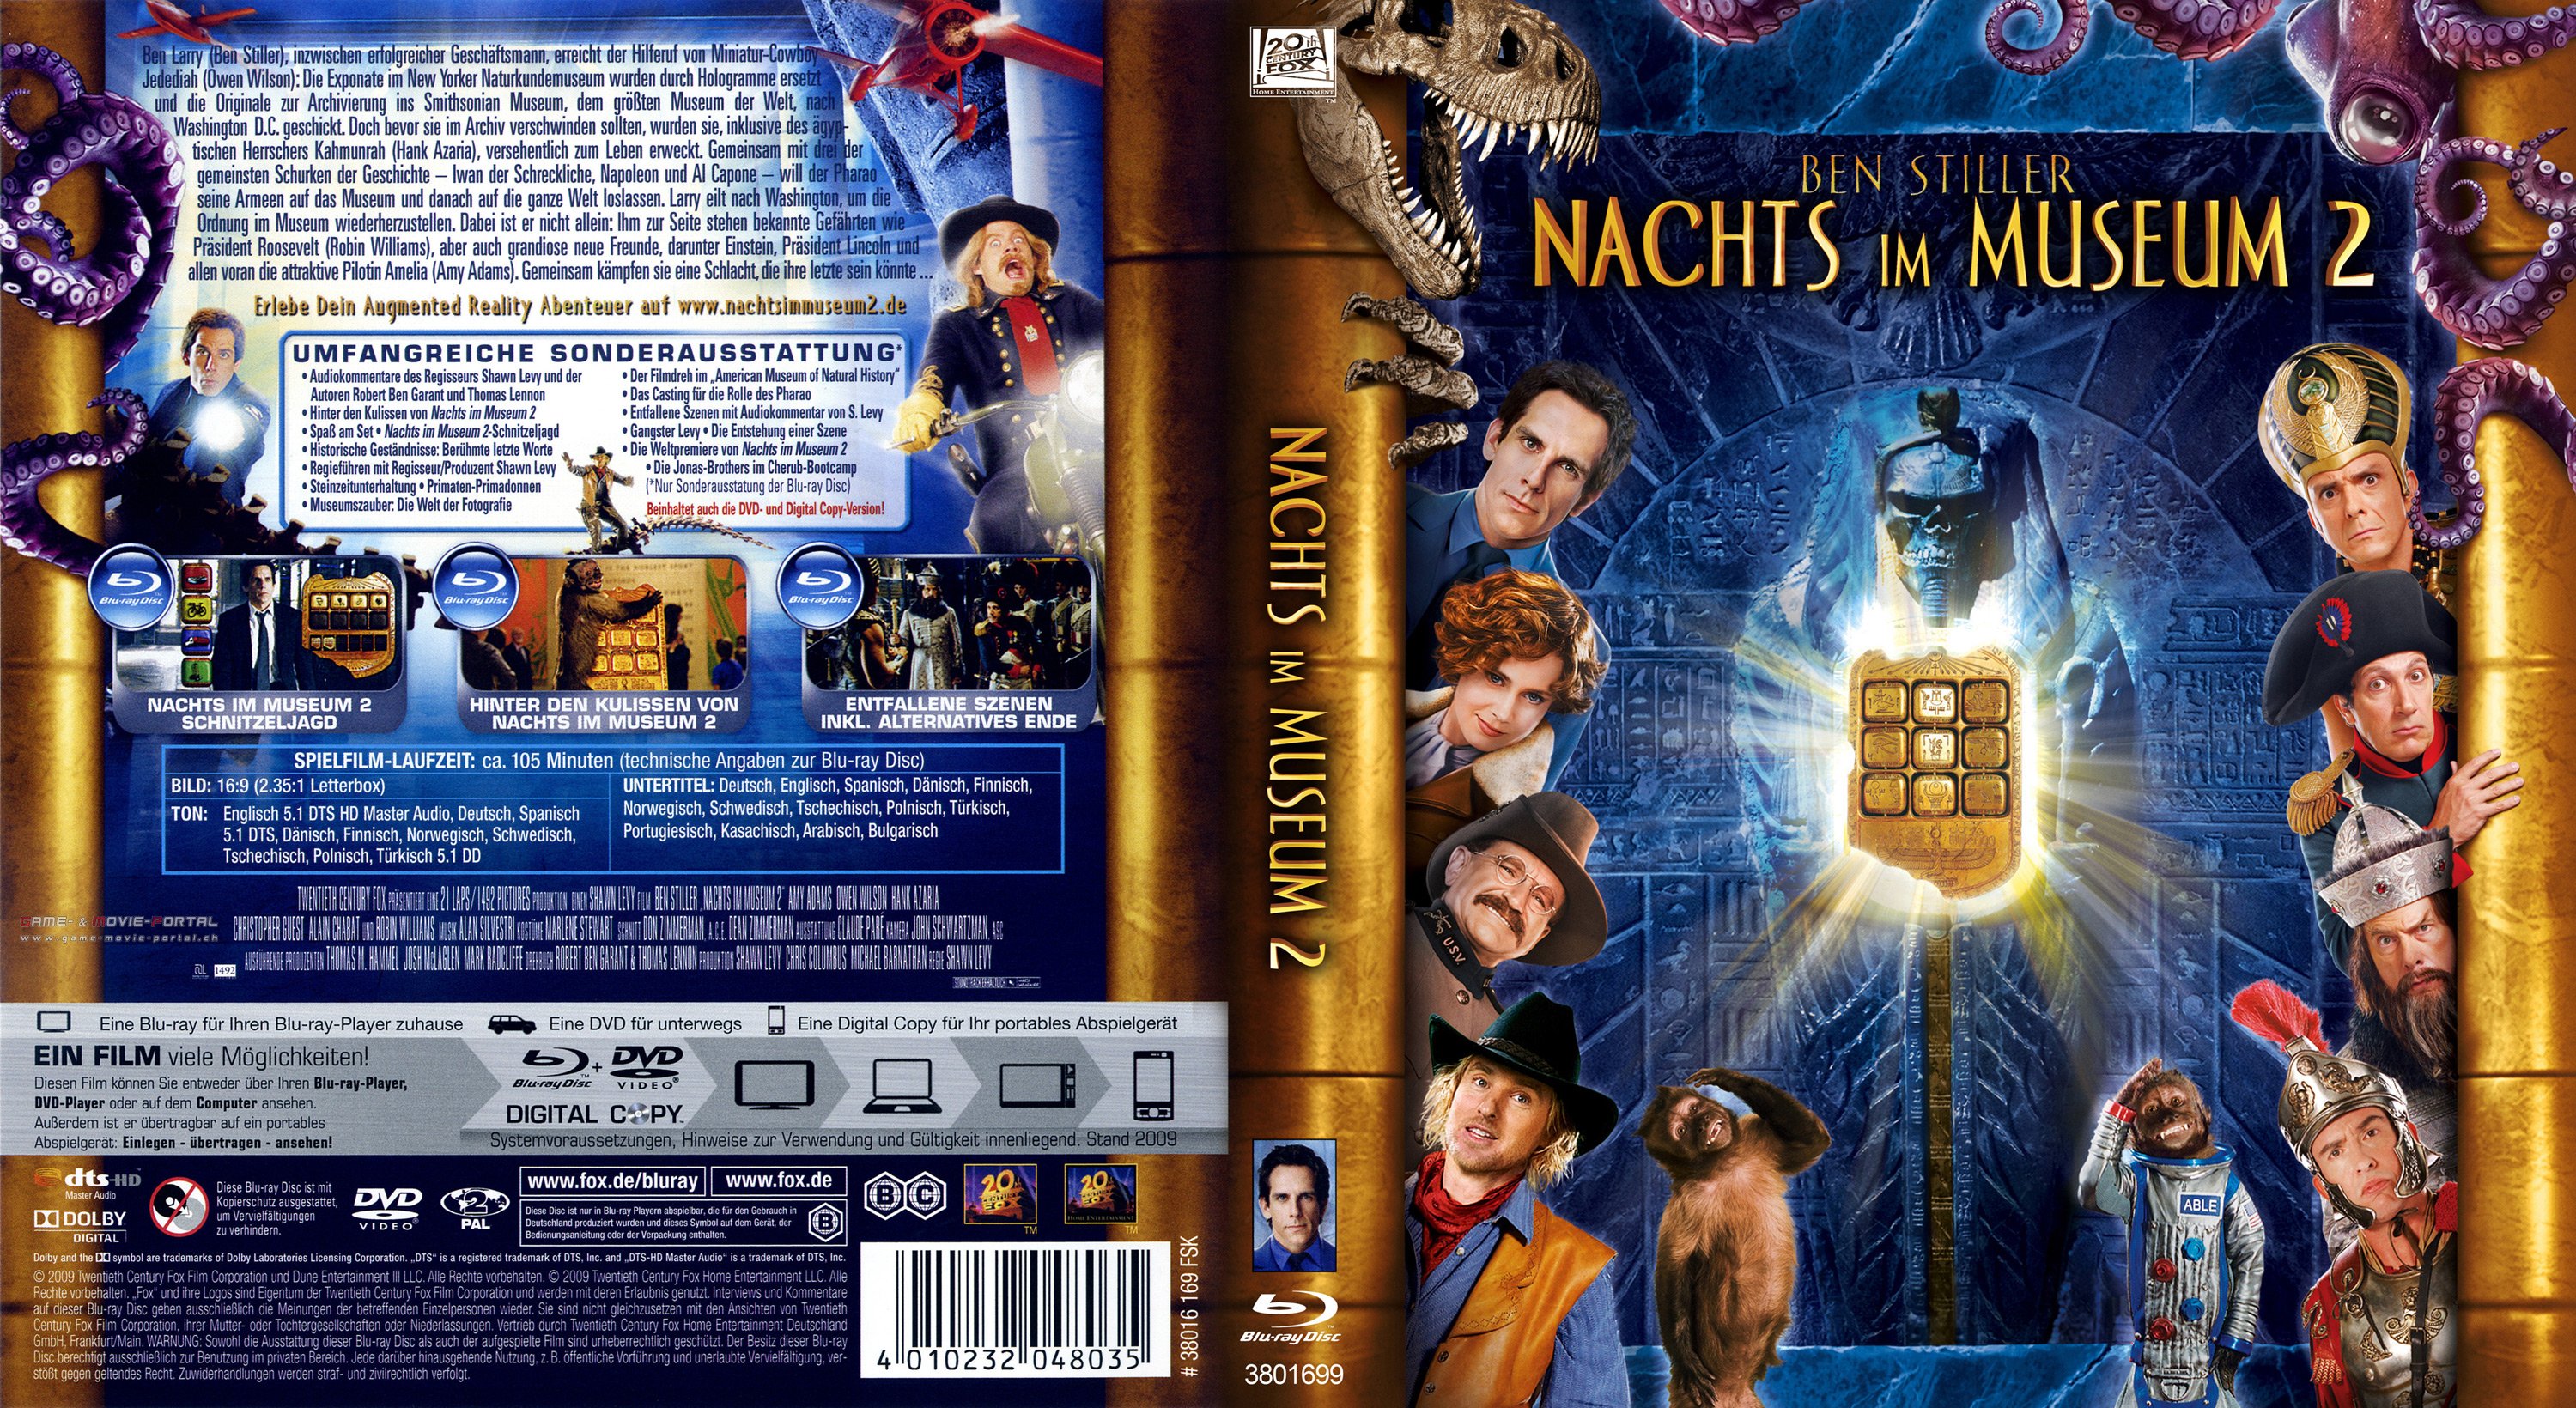 Nachts im Museum 2 cover 2 